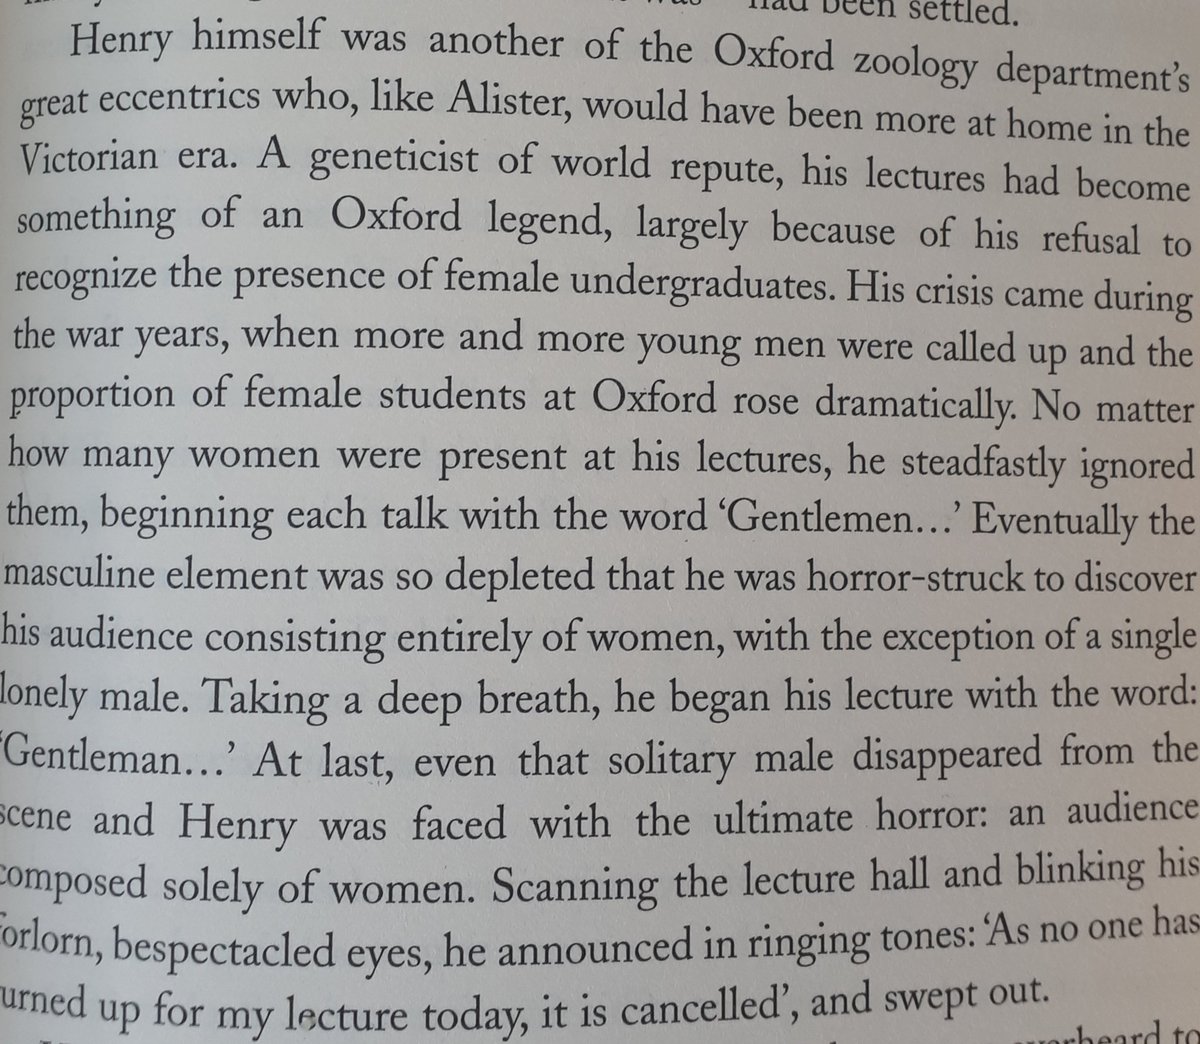 The invisible women in zoology lectures at Oxford, early 1950s. From Desmond Morris's book Watching